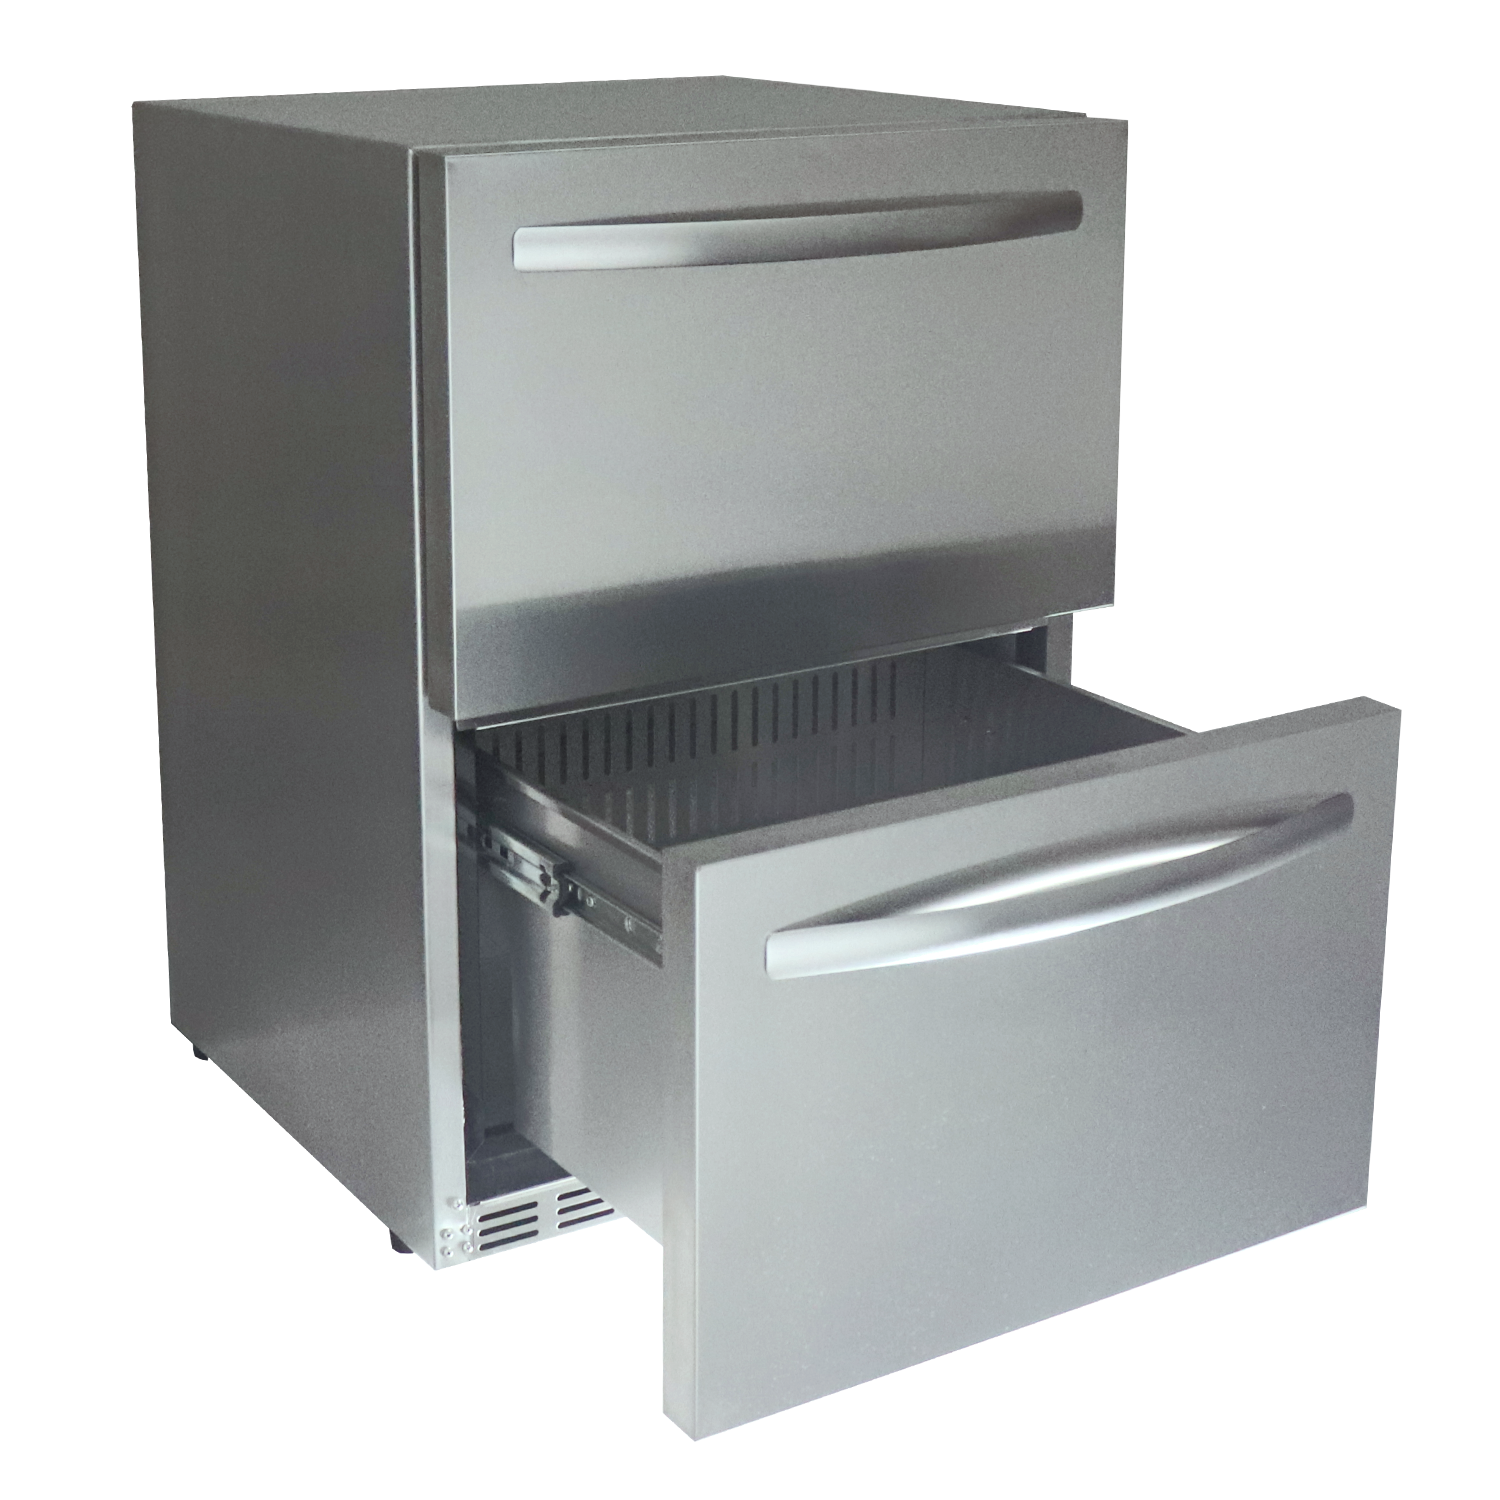 Stainless Two Drawer Refrigerator - UL Rated